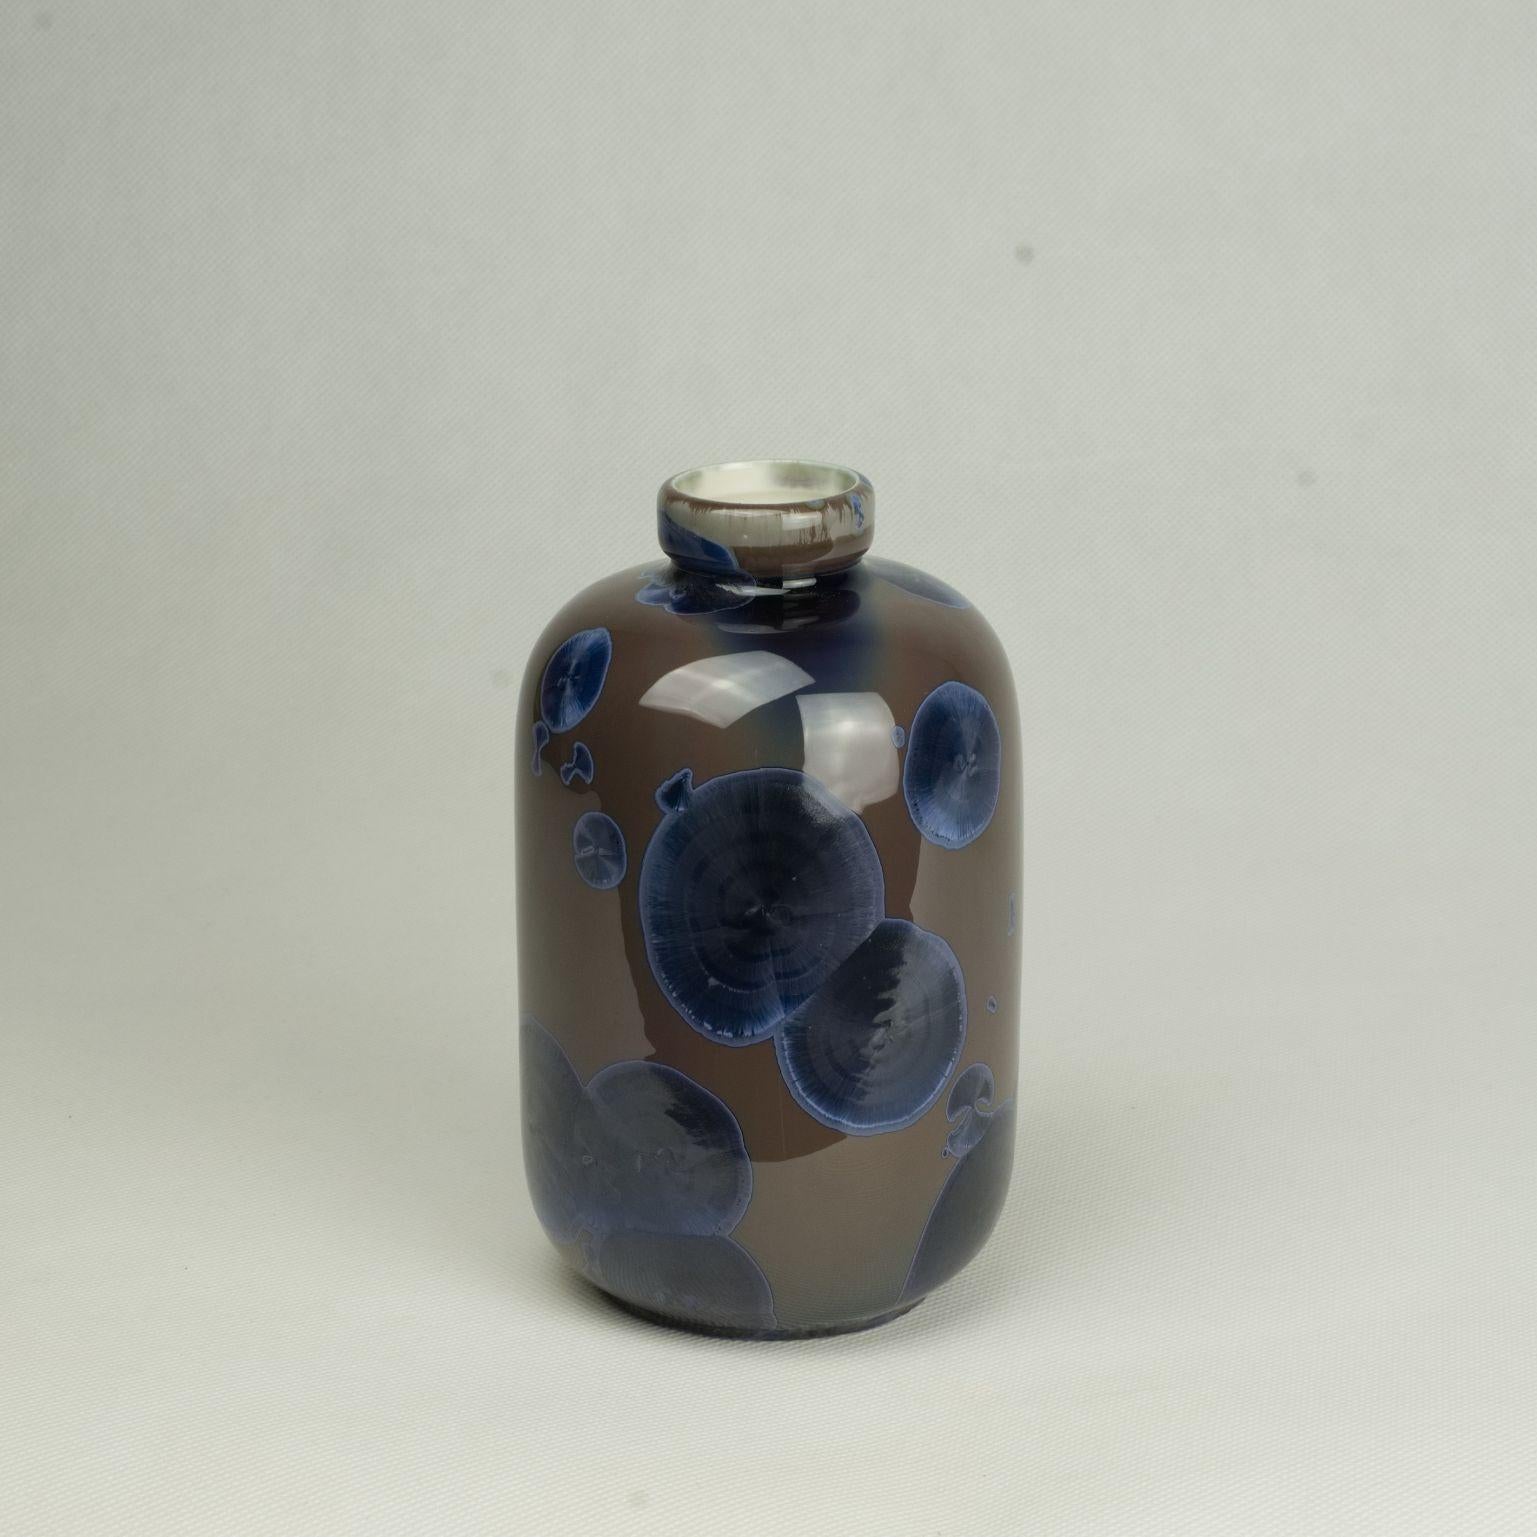 Small vase by Milan Pekar
Dimensions: D10 x H22 cm
Materials: Glaze, porcelain

Hand-made in the Czech Republic. 

Also available: different colors and patterns

Established own studio August 2009 – Focus mainly on porcelain, developing own